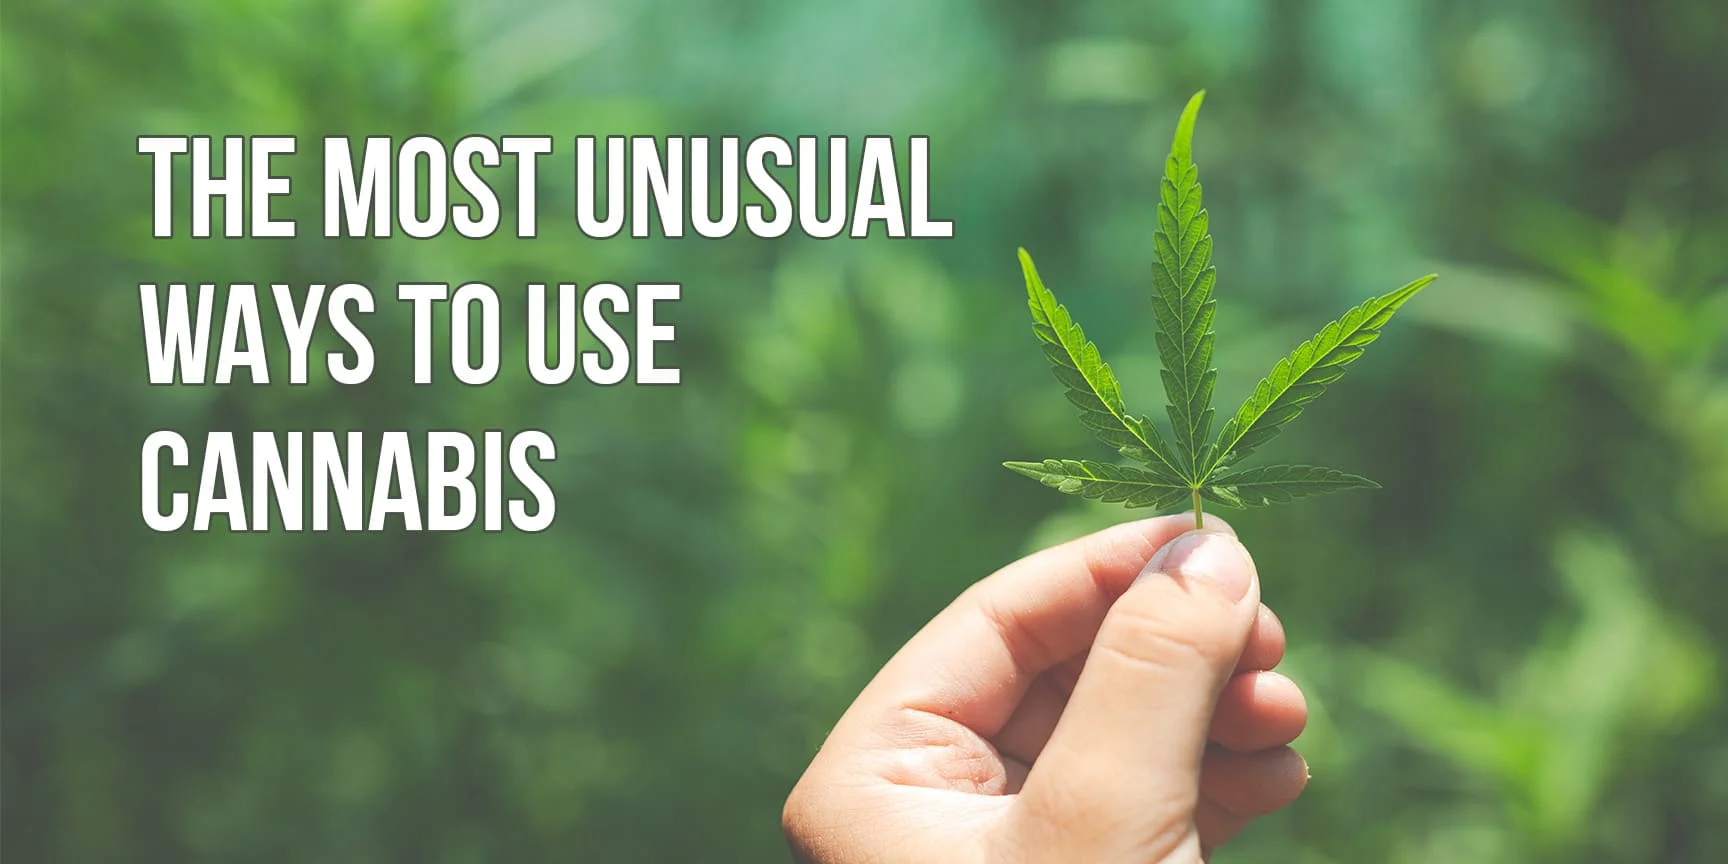 Lettering "The most unusual ways to use cannabis" and cannabis leave